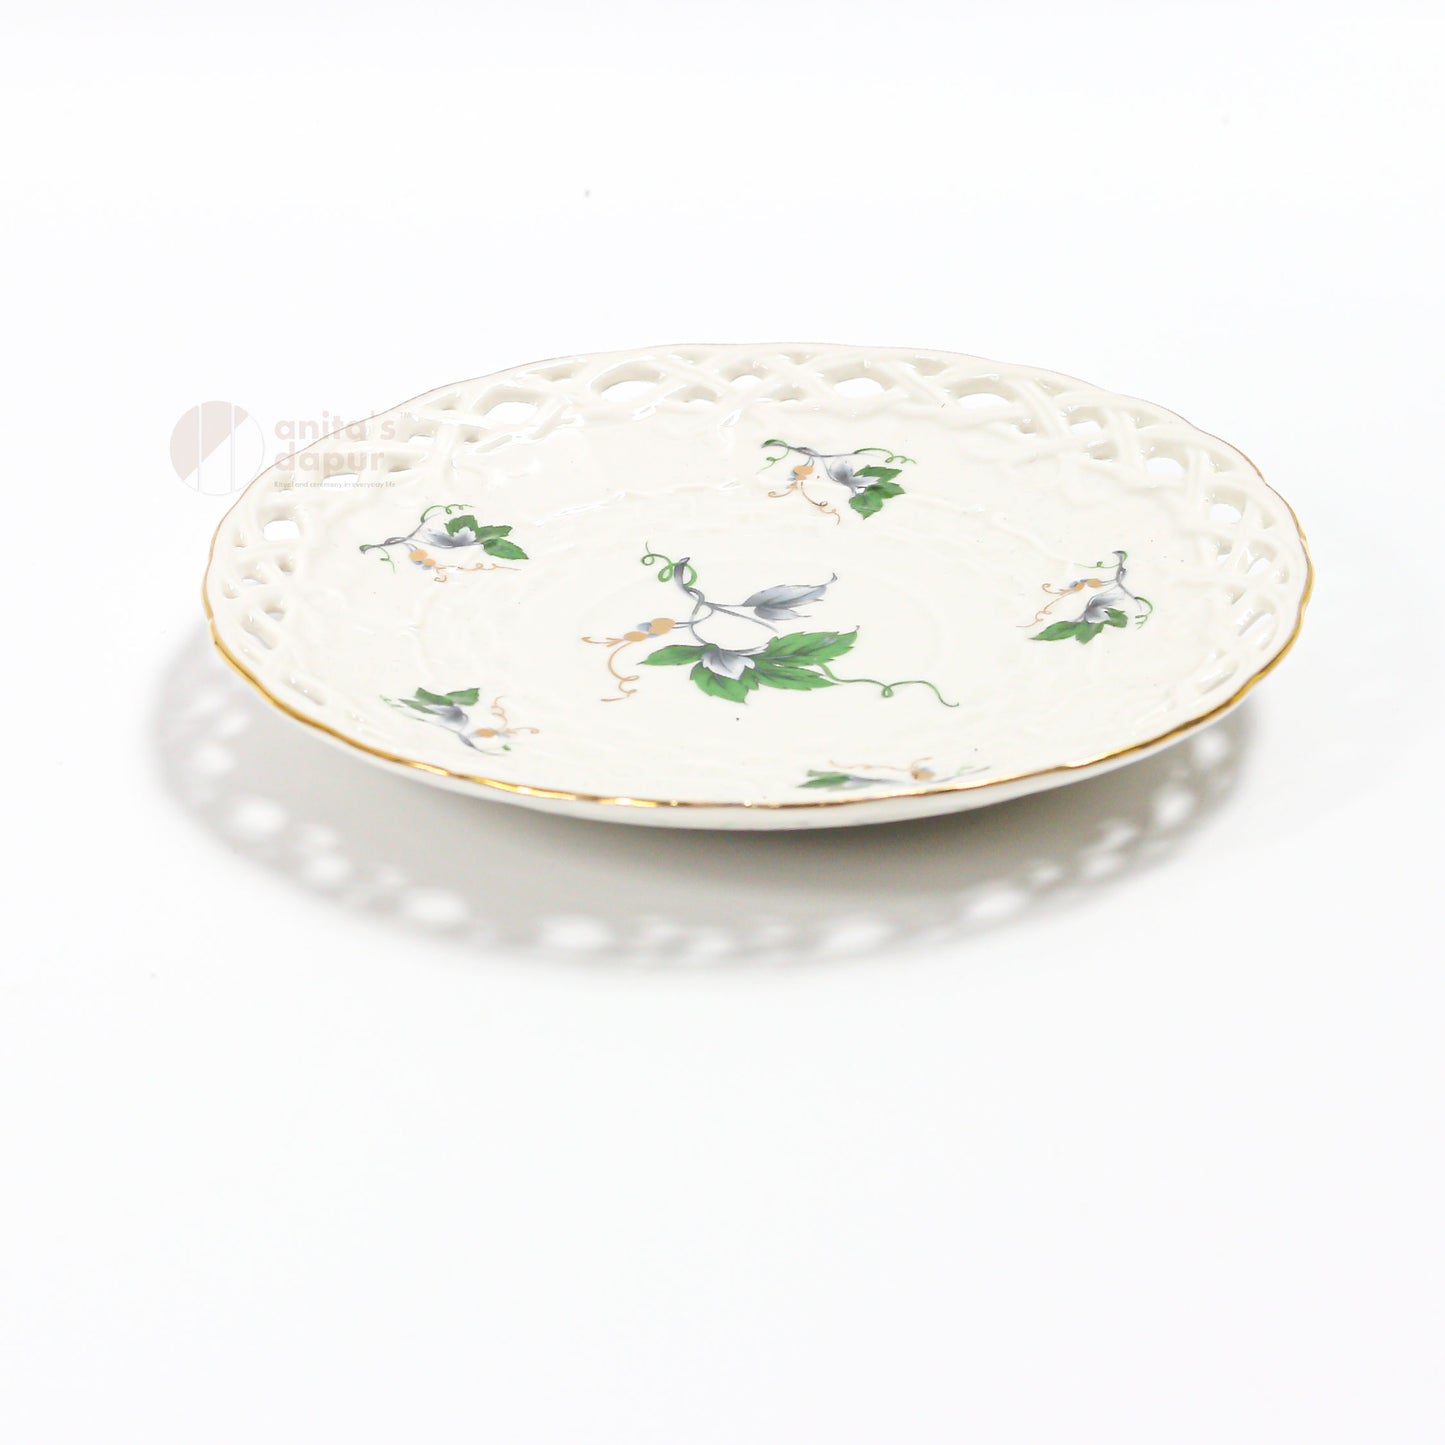 English Green Leaf Cup & Saucer